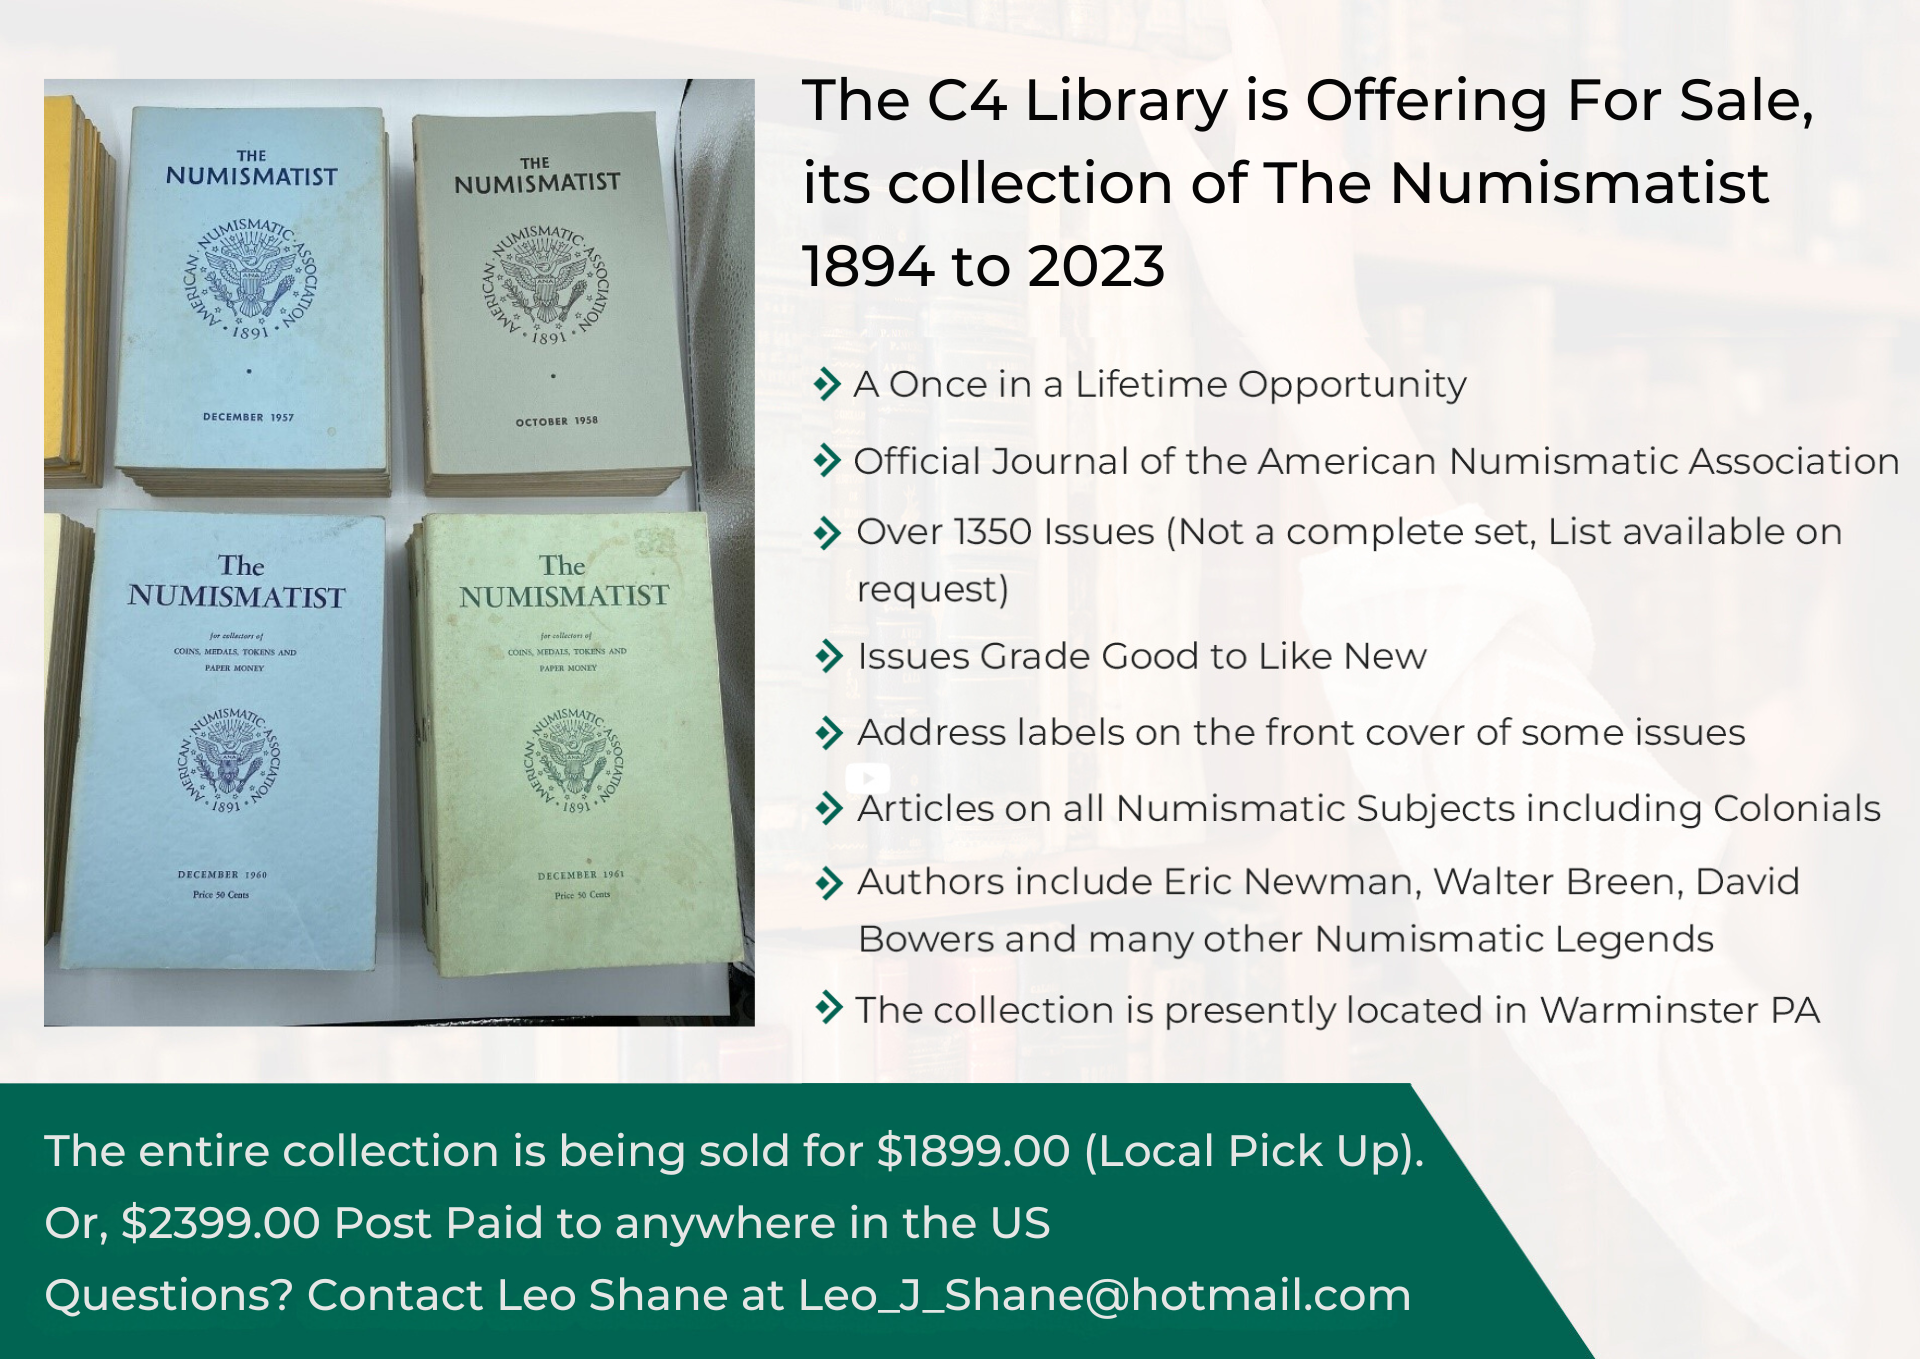 The C4 Library is Offering For Sale, its collection of “The Numismatist” 1894 to 2023